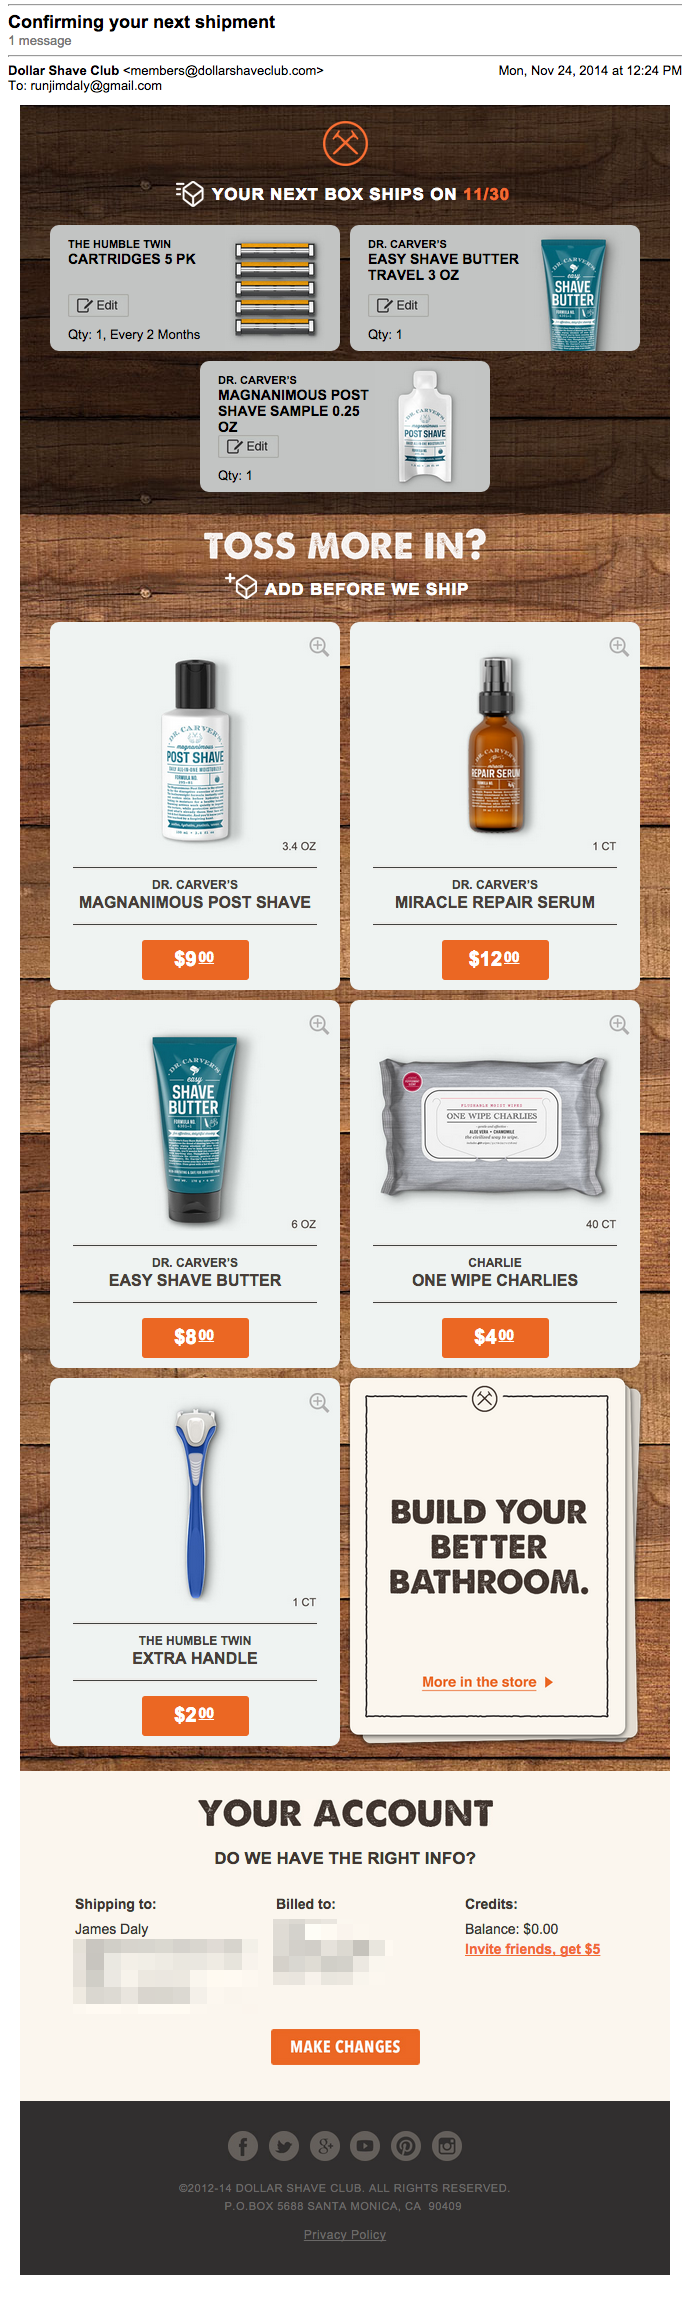 Dollar_Shave_Club_Upsell_Email onboarding email